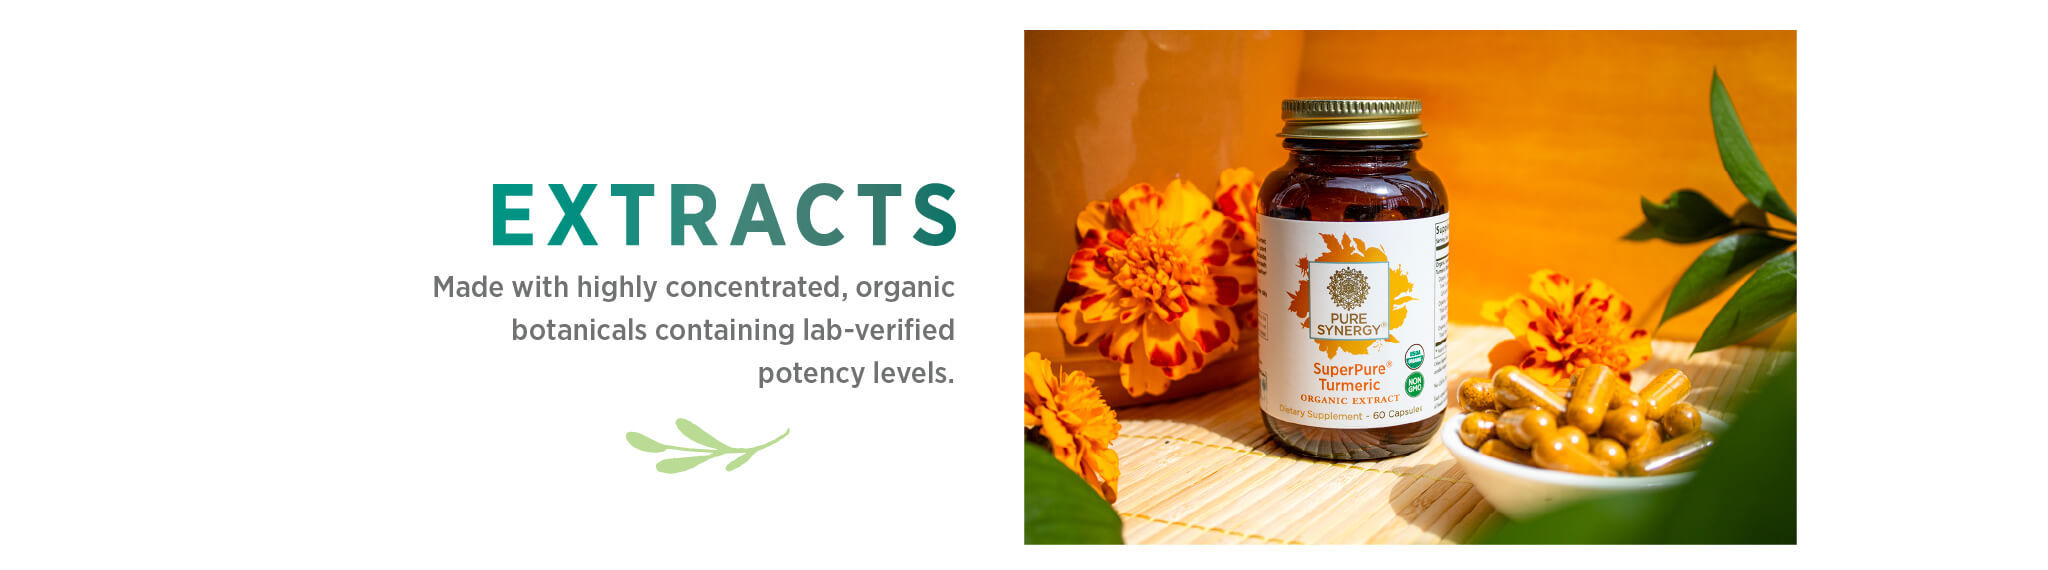 Extracts: Made with highly concentrated, organic botanicals containing lab-verified potency levels. 